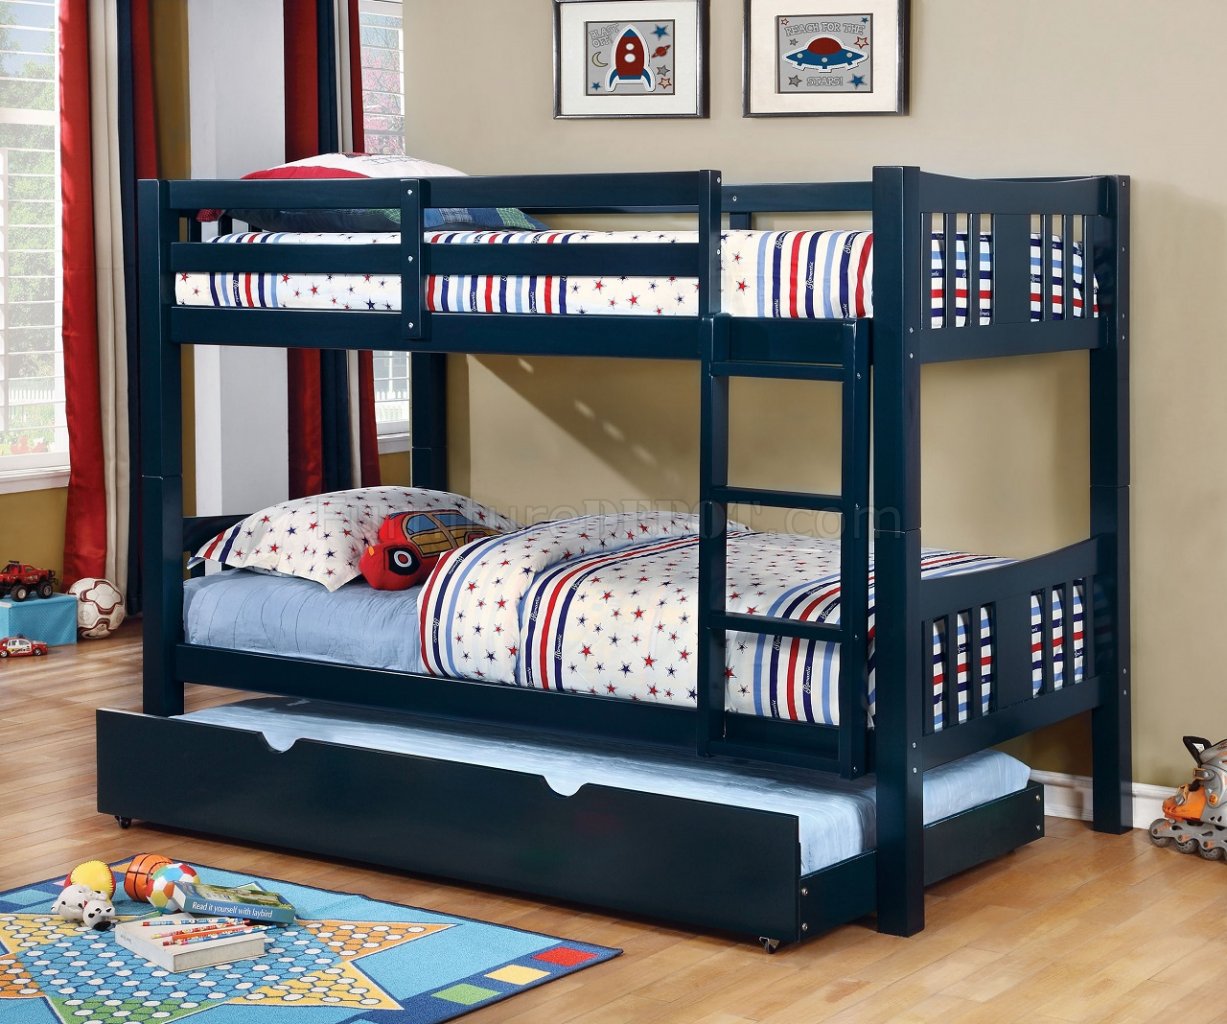 Cameron Cm Bk929bl Bunk Bed In Blue W Options